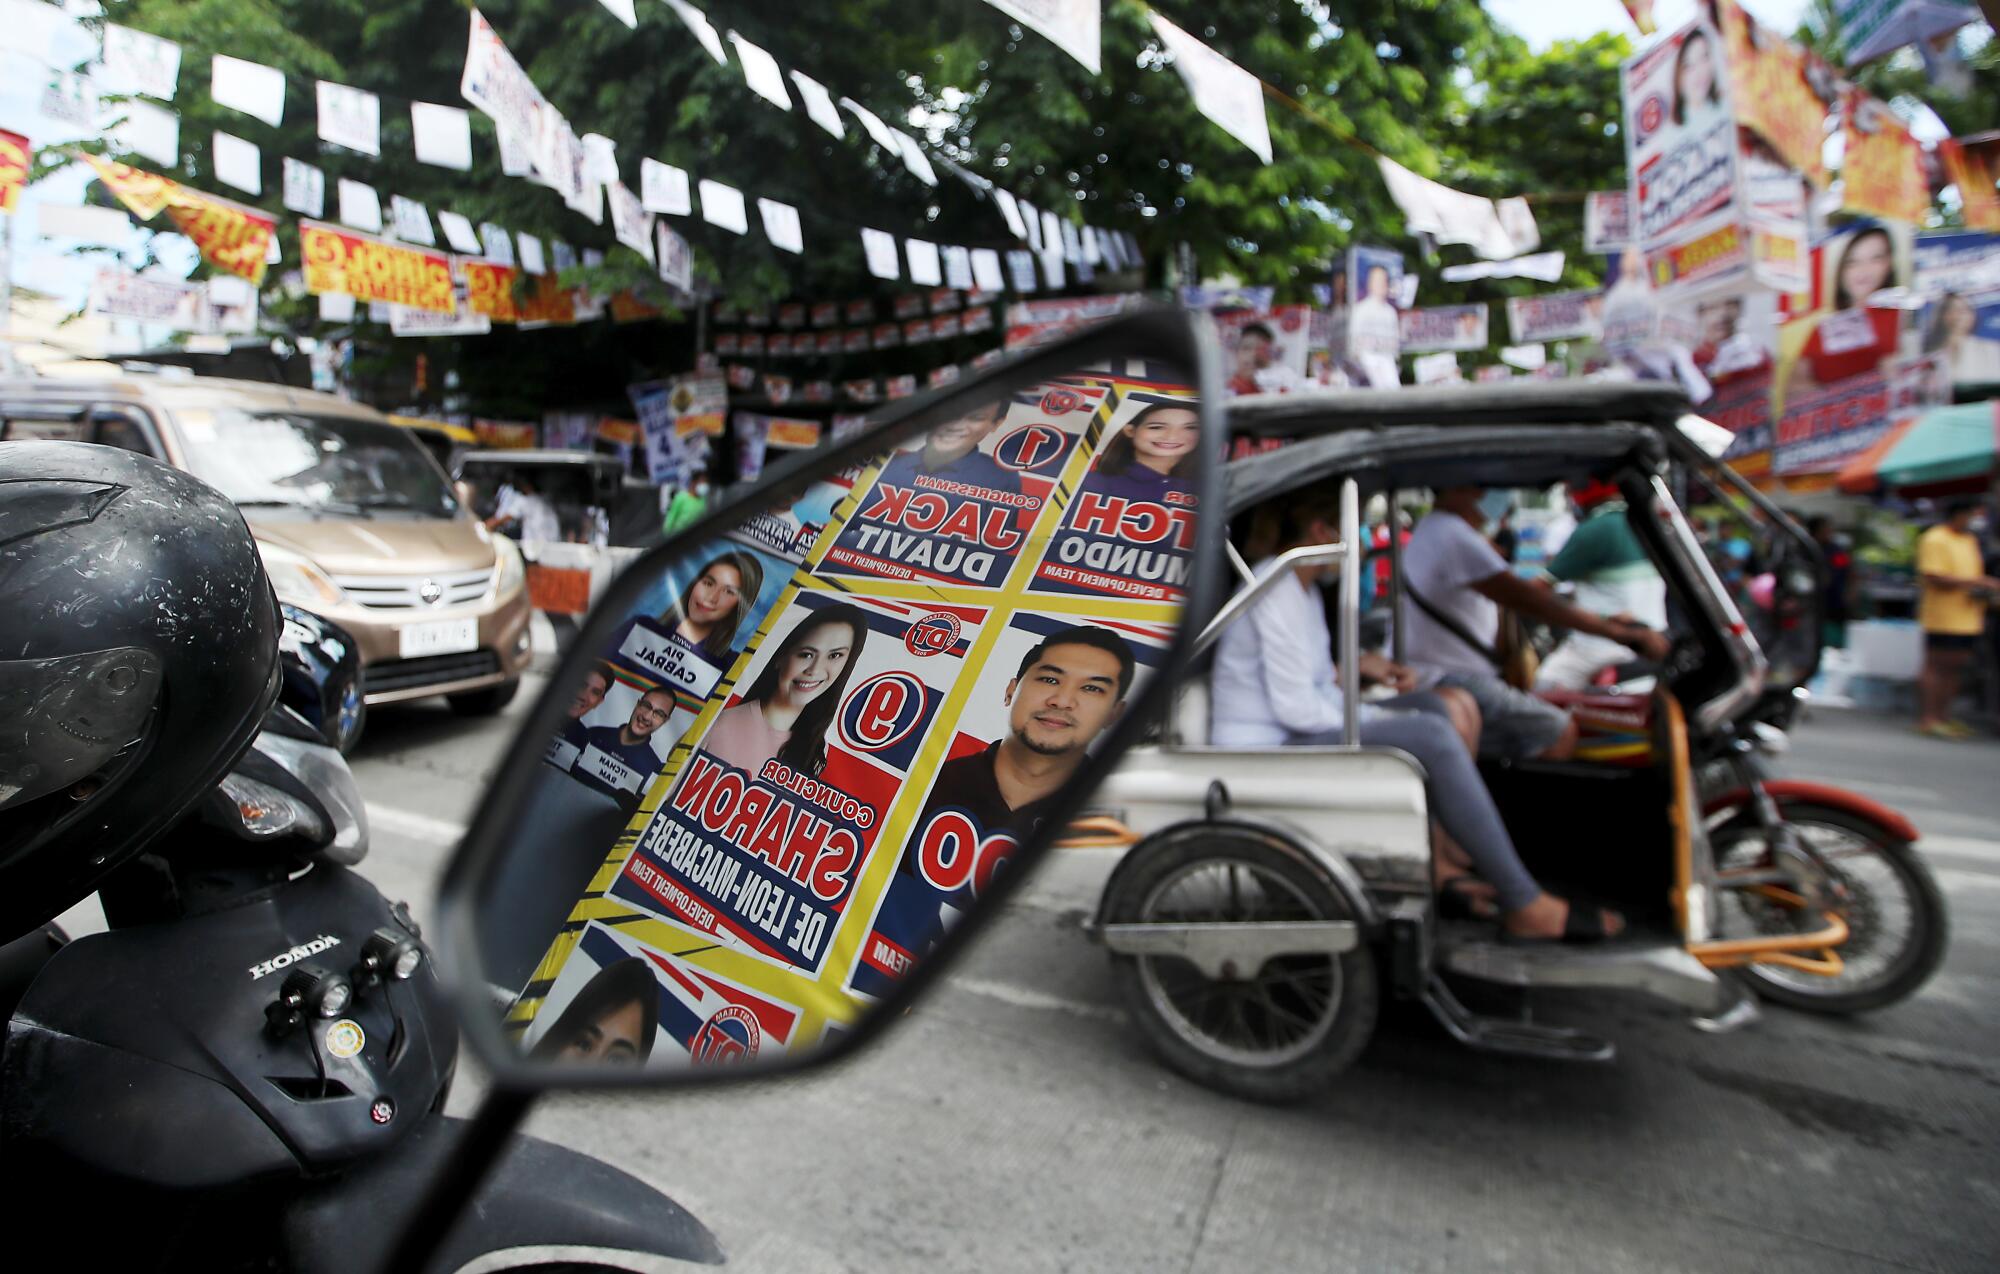 Campaign posters are reflected in the mirror of a motorcycle.